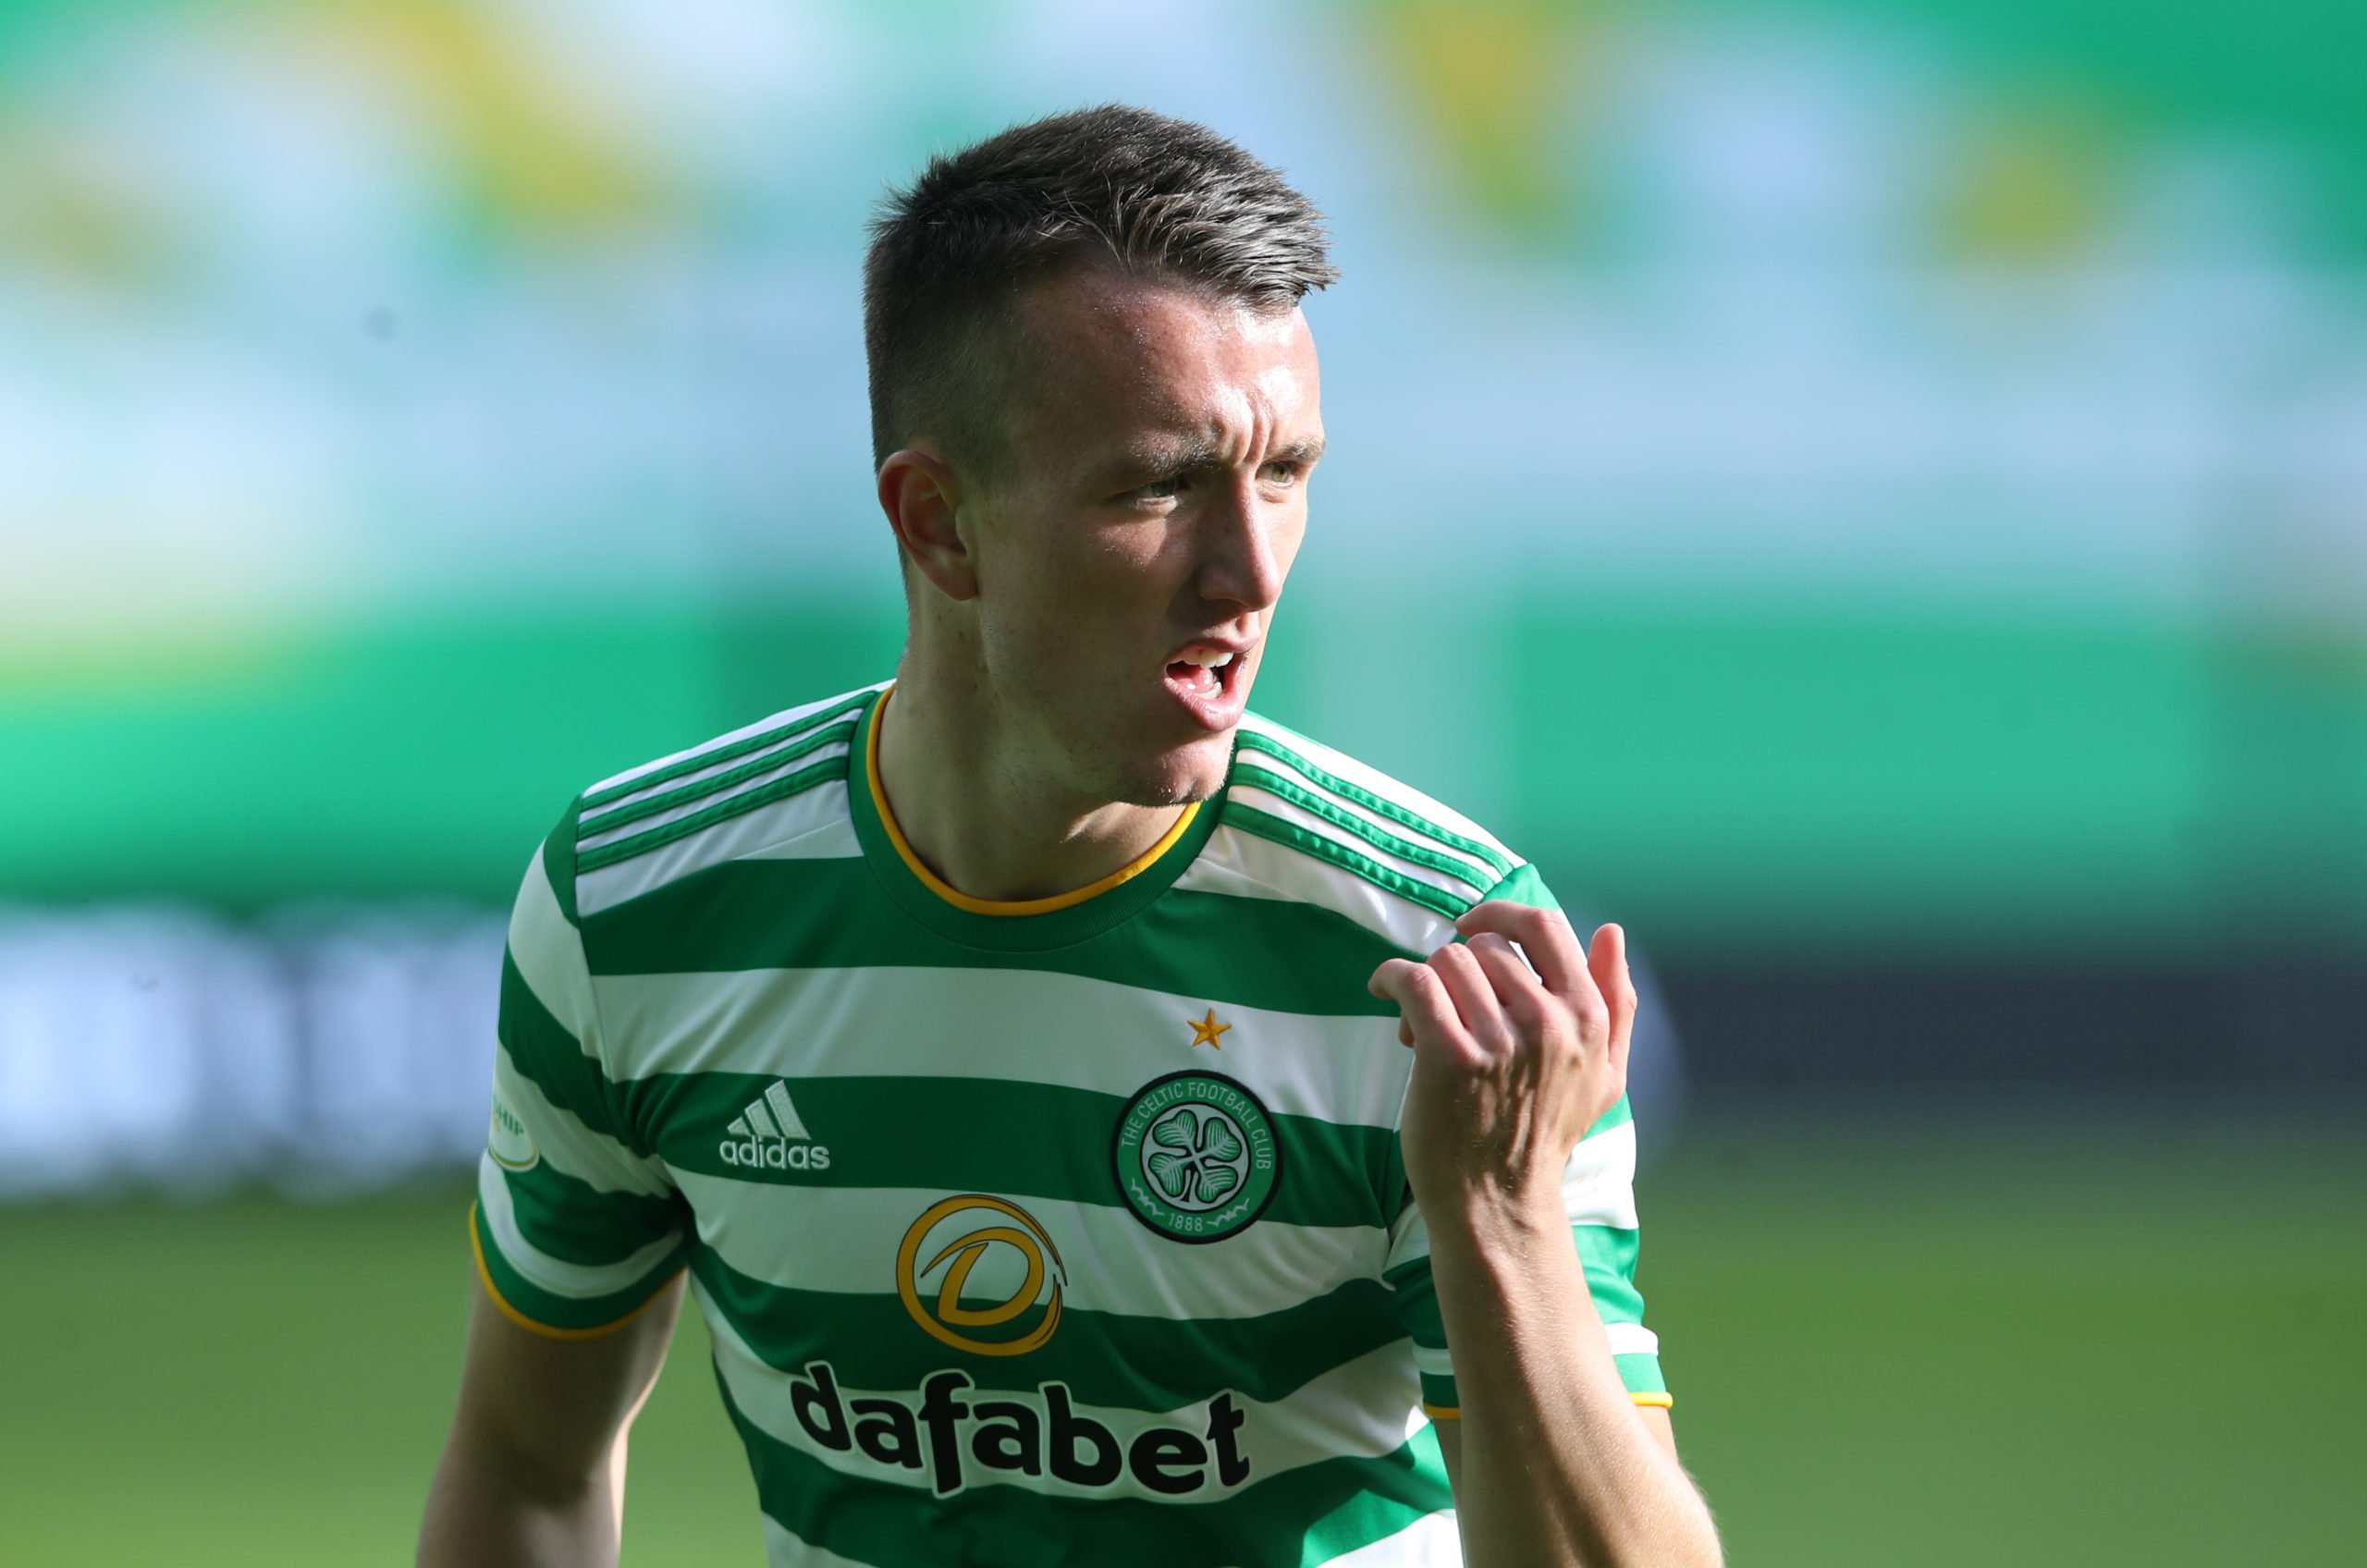 The next Turnbull? - 3 Scottish Premiership talents that Celtic should be taking seriously